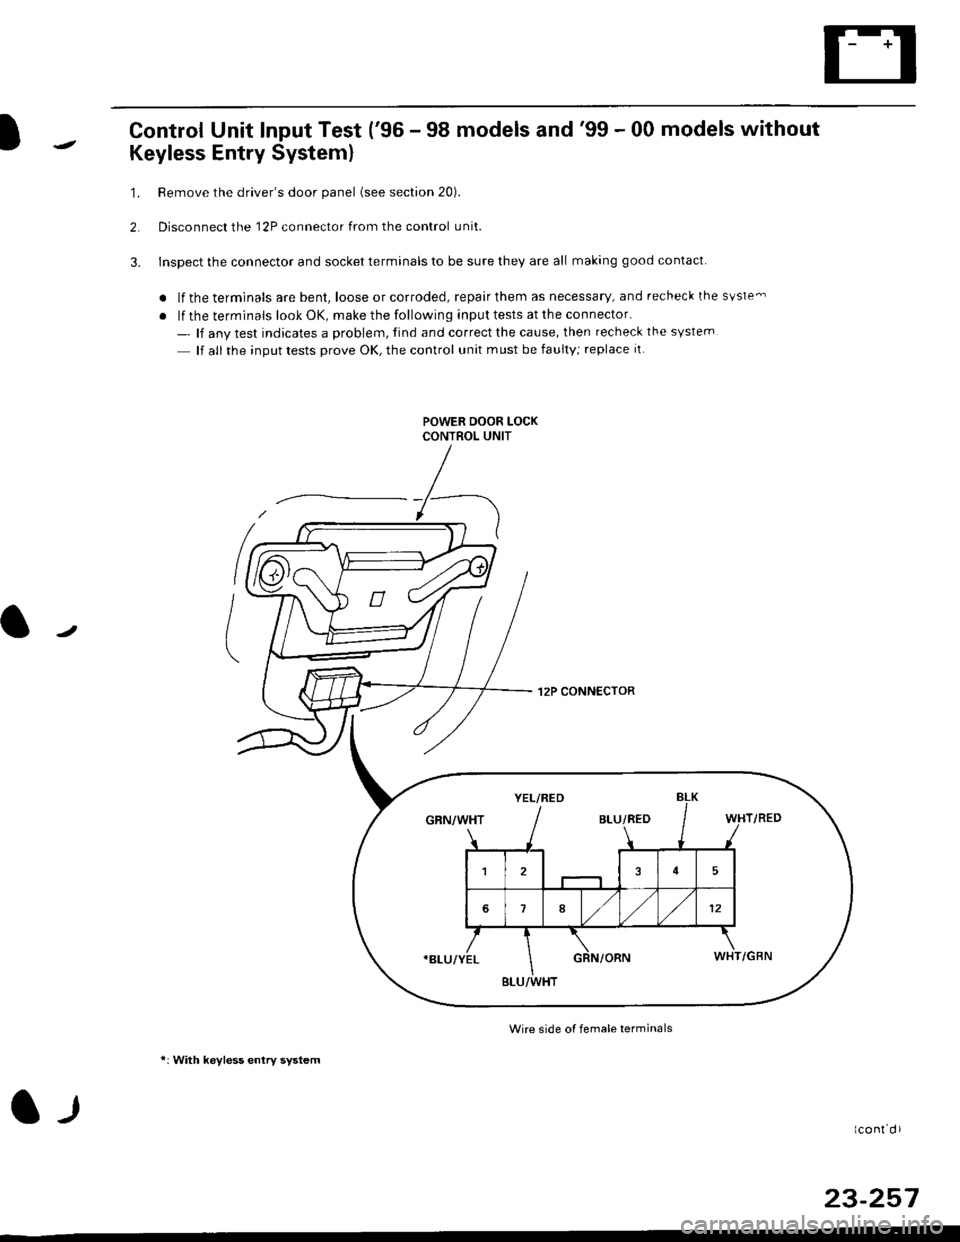 HONDA CIVIC 1998 6.G Workshop Manual Control Unit Input Test (96 - 98 models and99 - 00 models without
Keyless Entry System)
1. Remove the drivers door panel (see section 20).
2. Disconnect the 12P connector from the control unit.
3. 